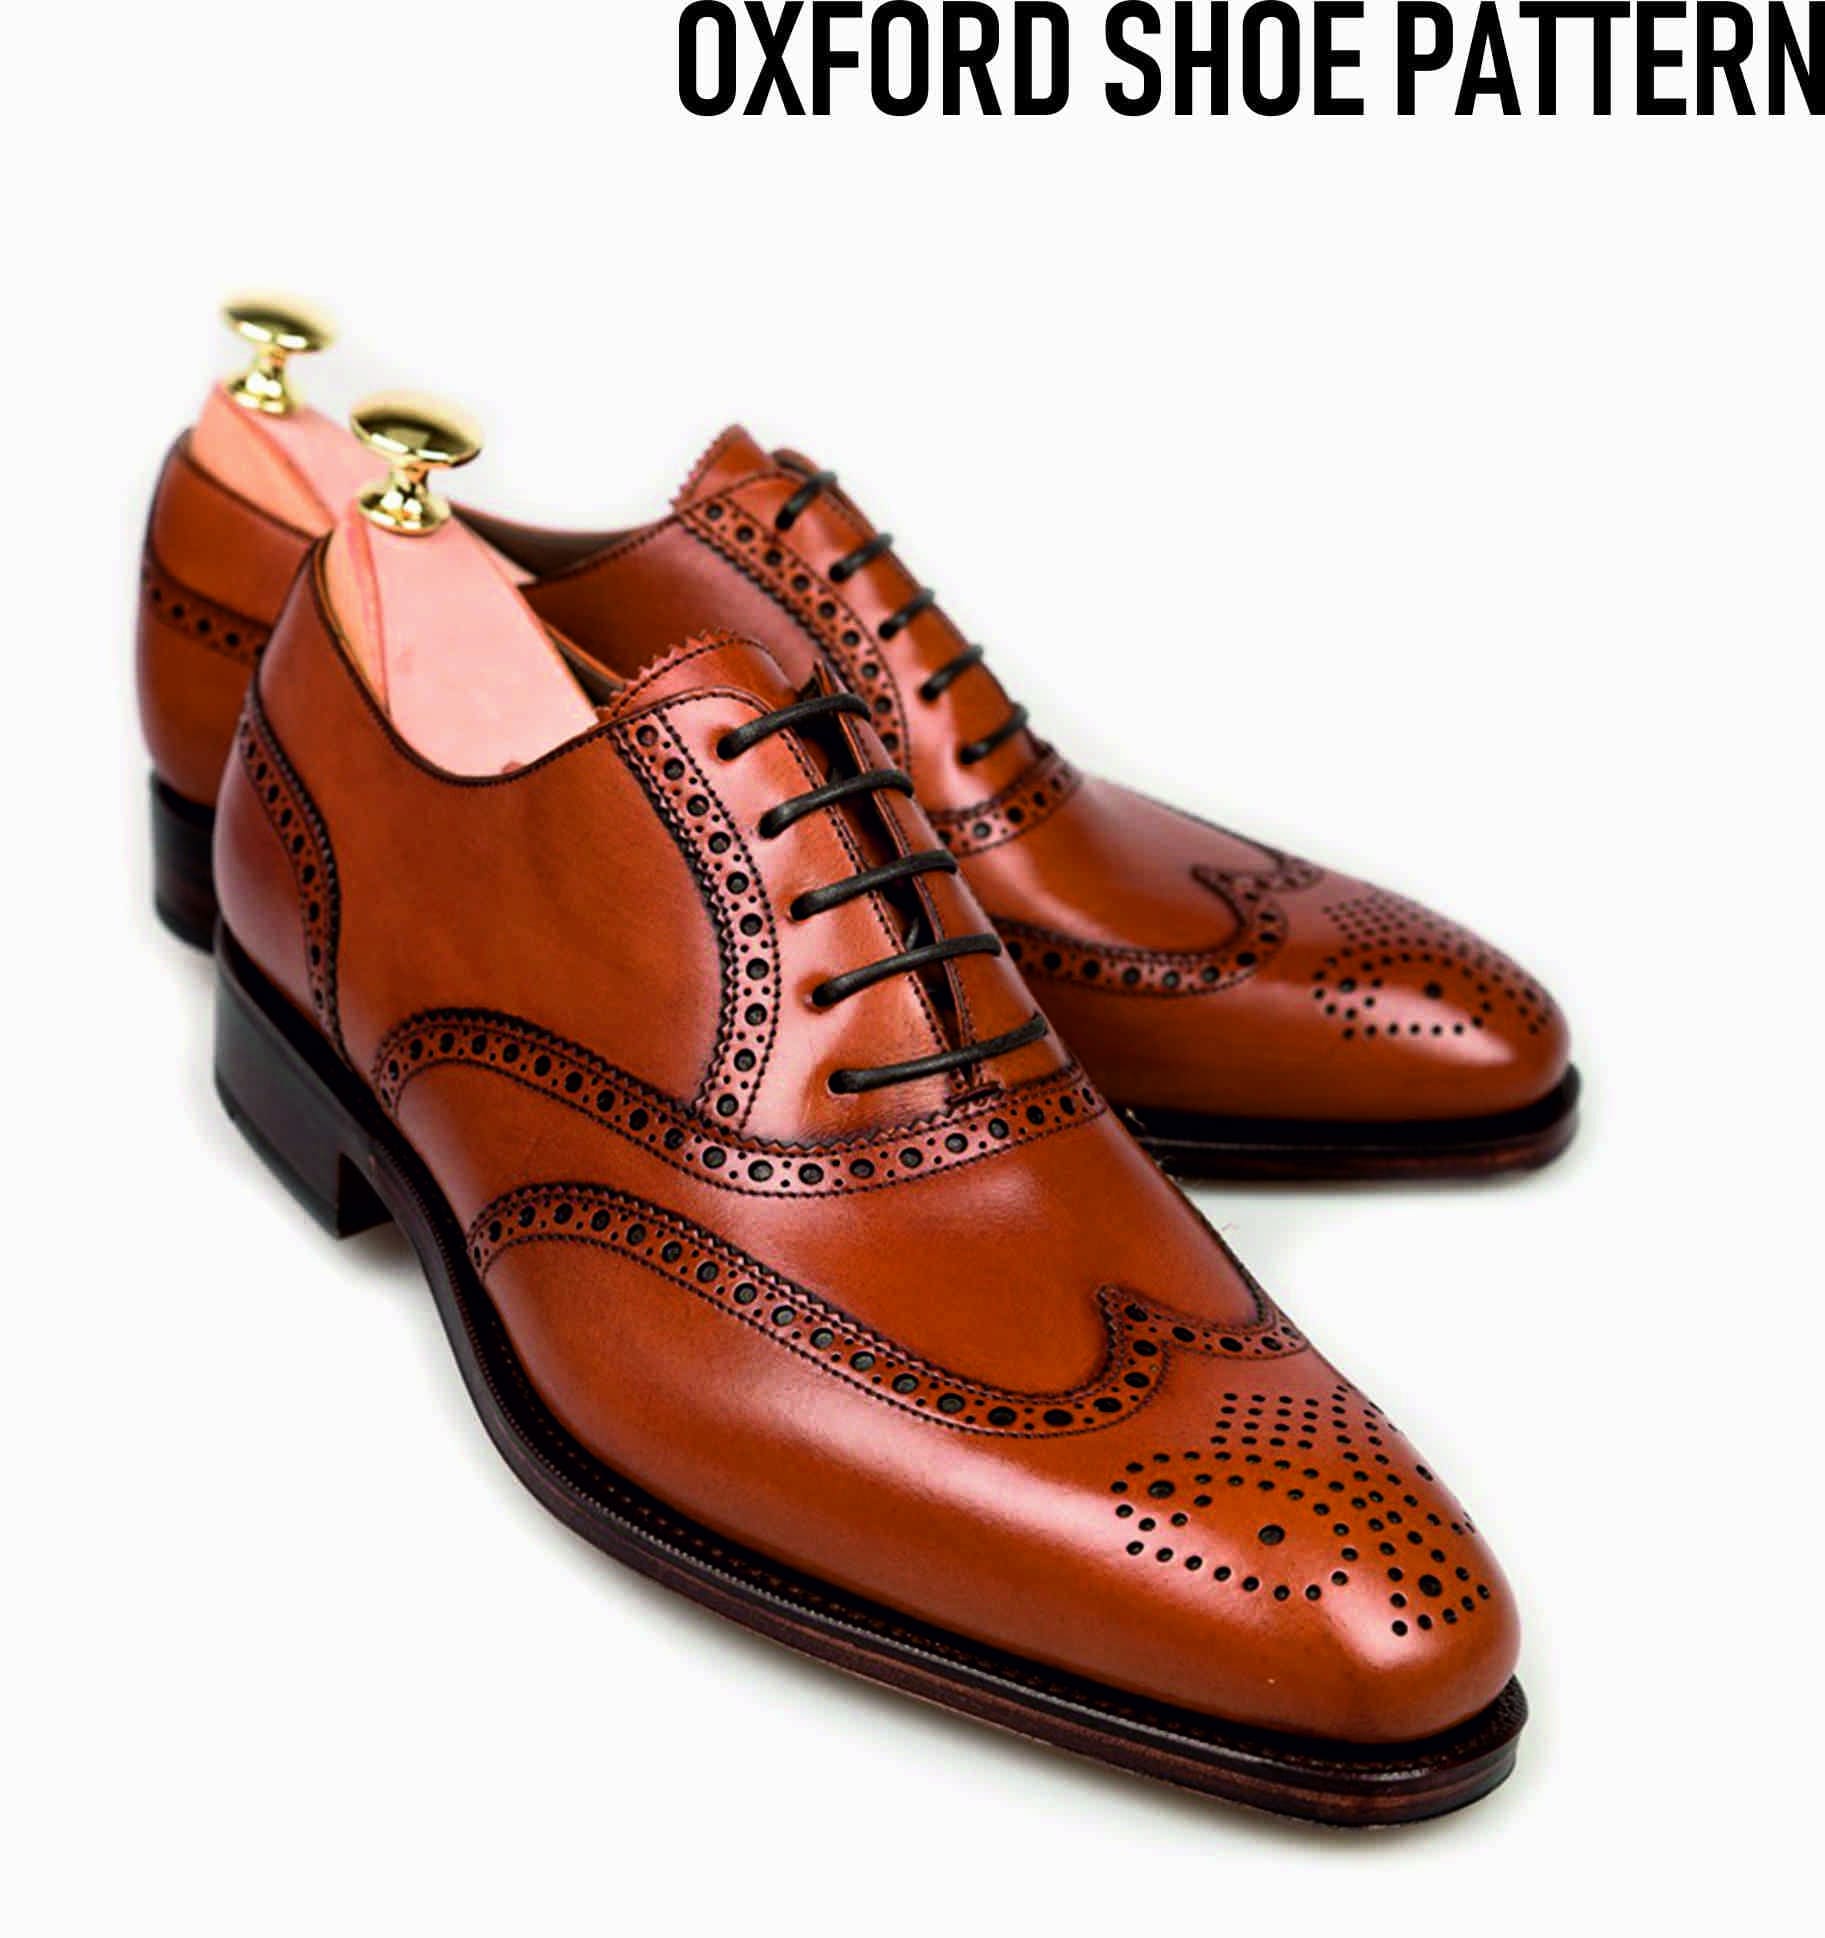 Oxford Shoe Pattern Printable Shoe Pattern for Shoemakers, Real Size ...